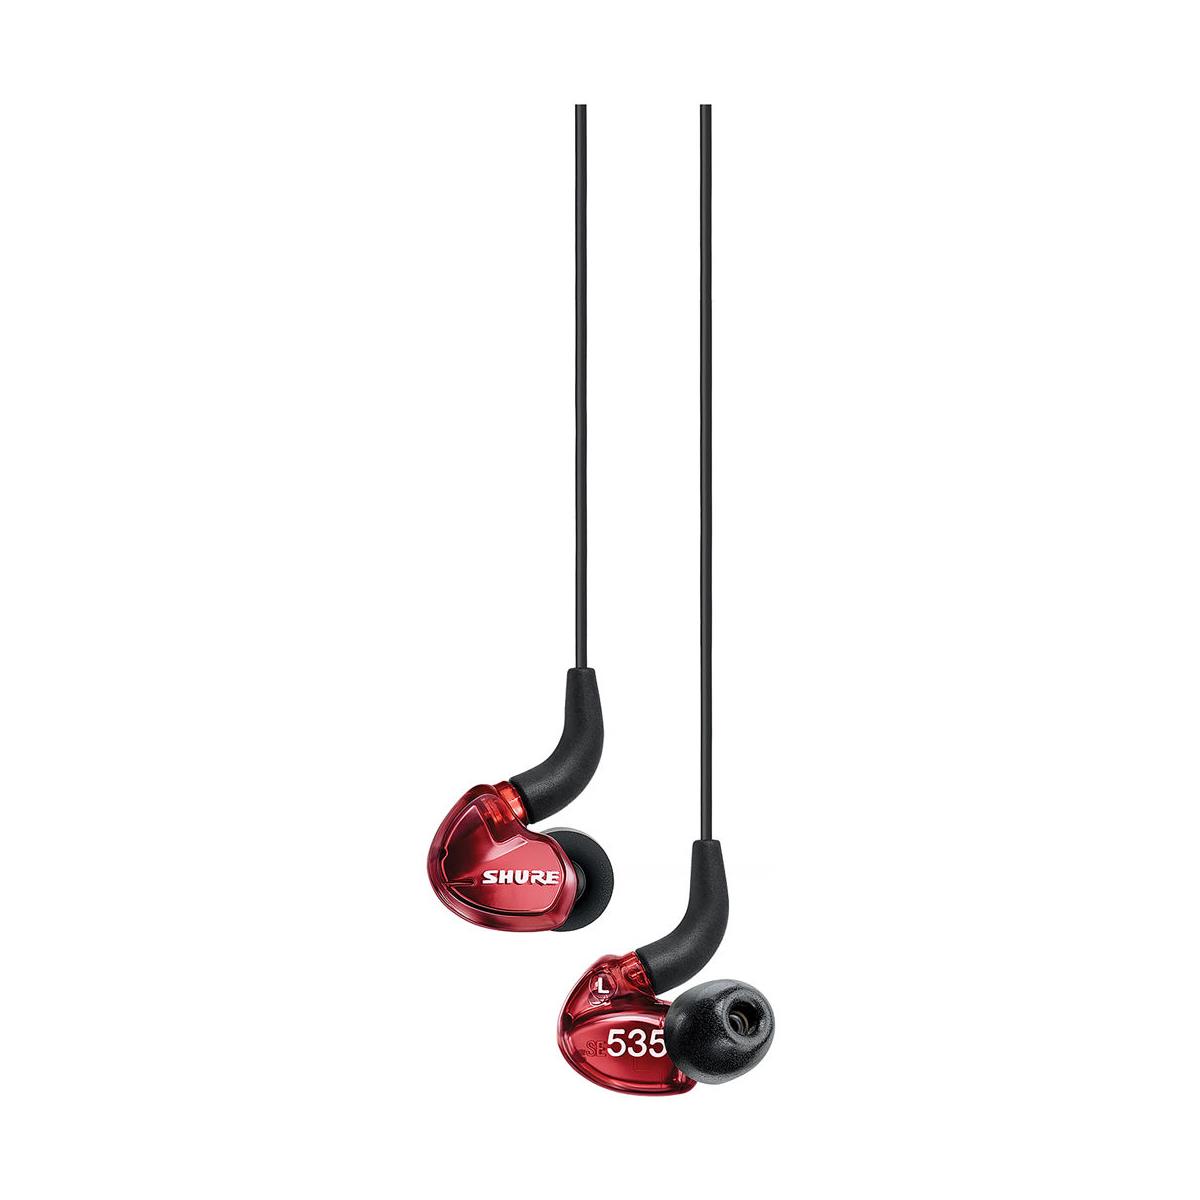 Image of Shure SE535 Limited Edition Earphones with Audio Cable